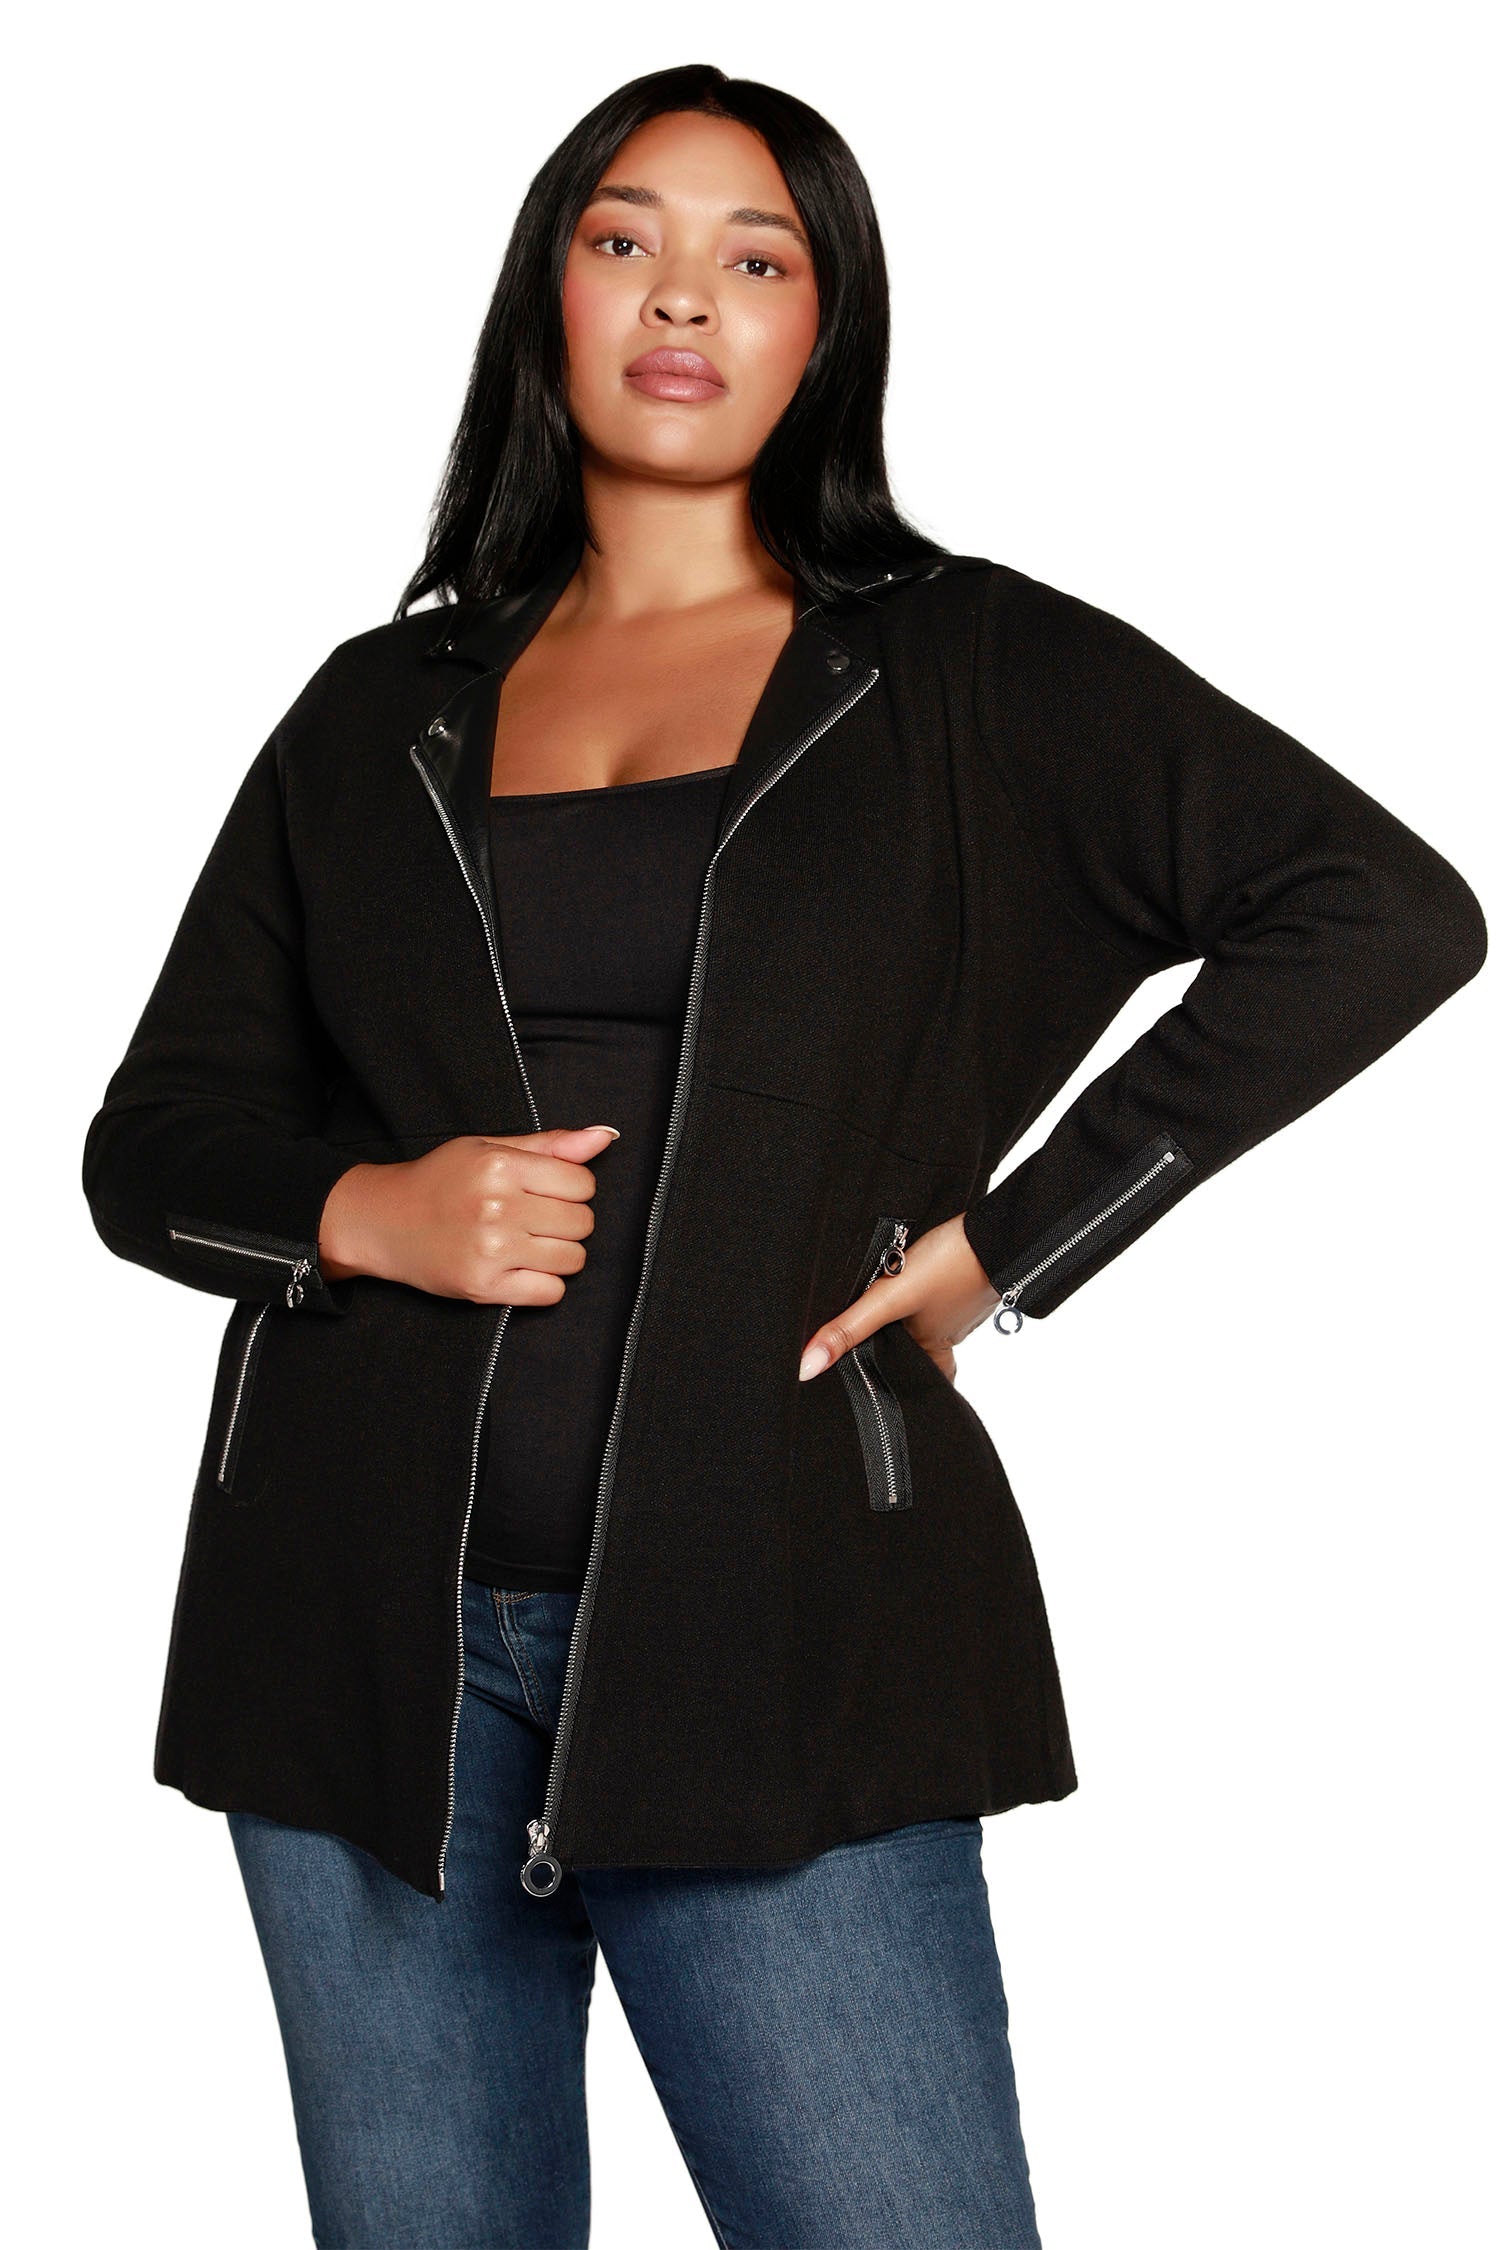 Women's Fit and Flare Jacket with Vegan Leather Trim and Pockets | Curvy